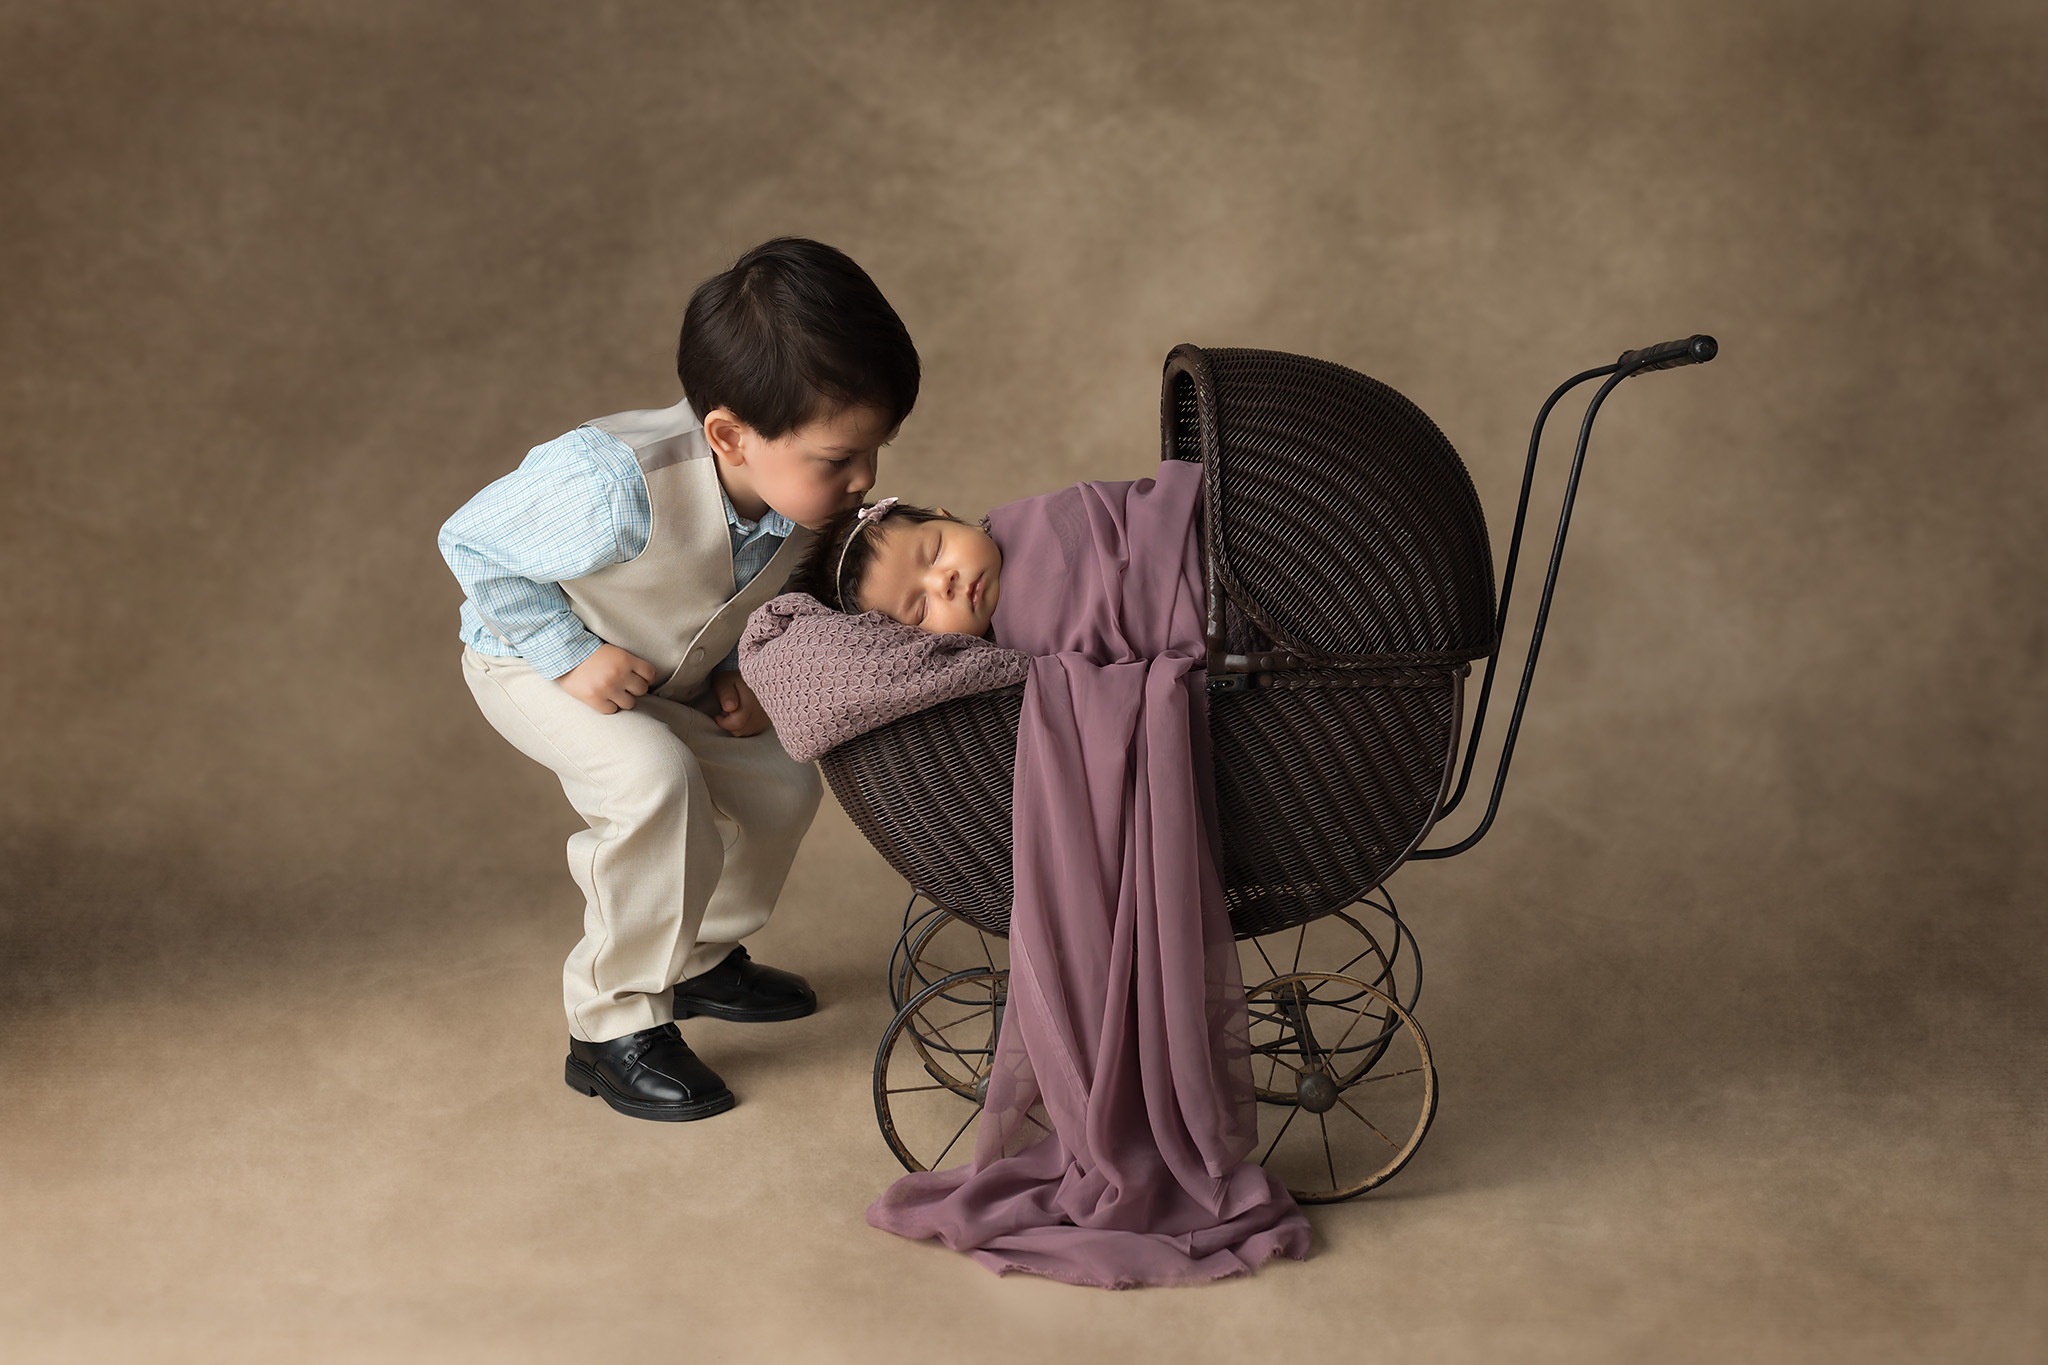 professional photo of young child kissing forehead of newborn in pram